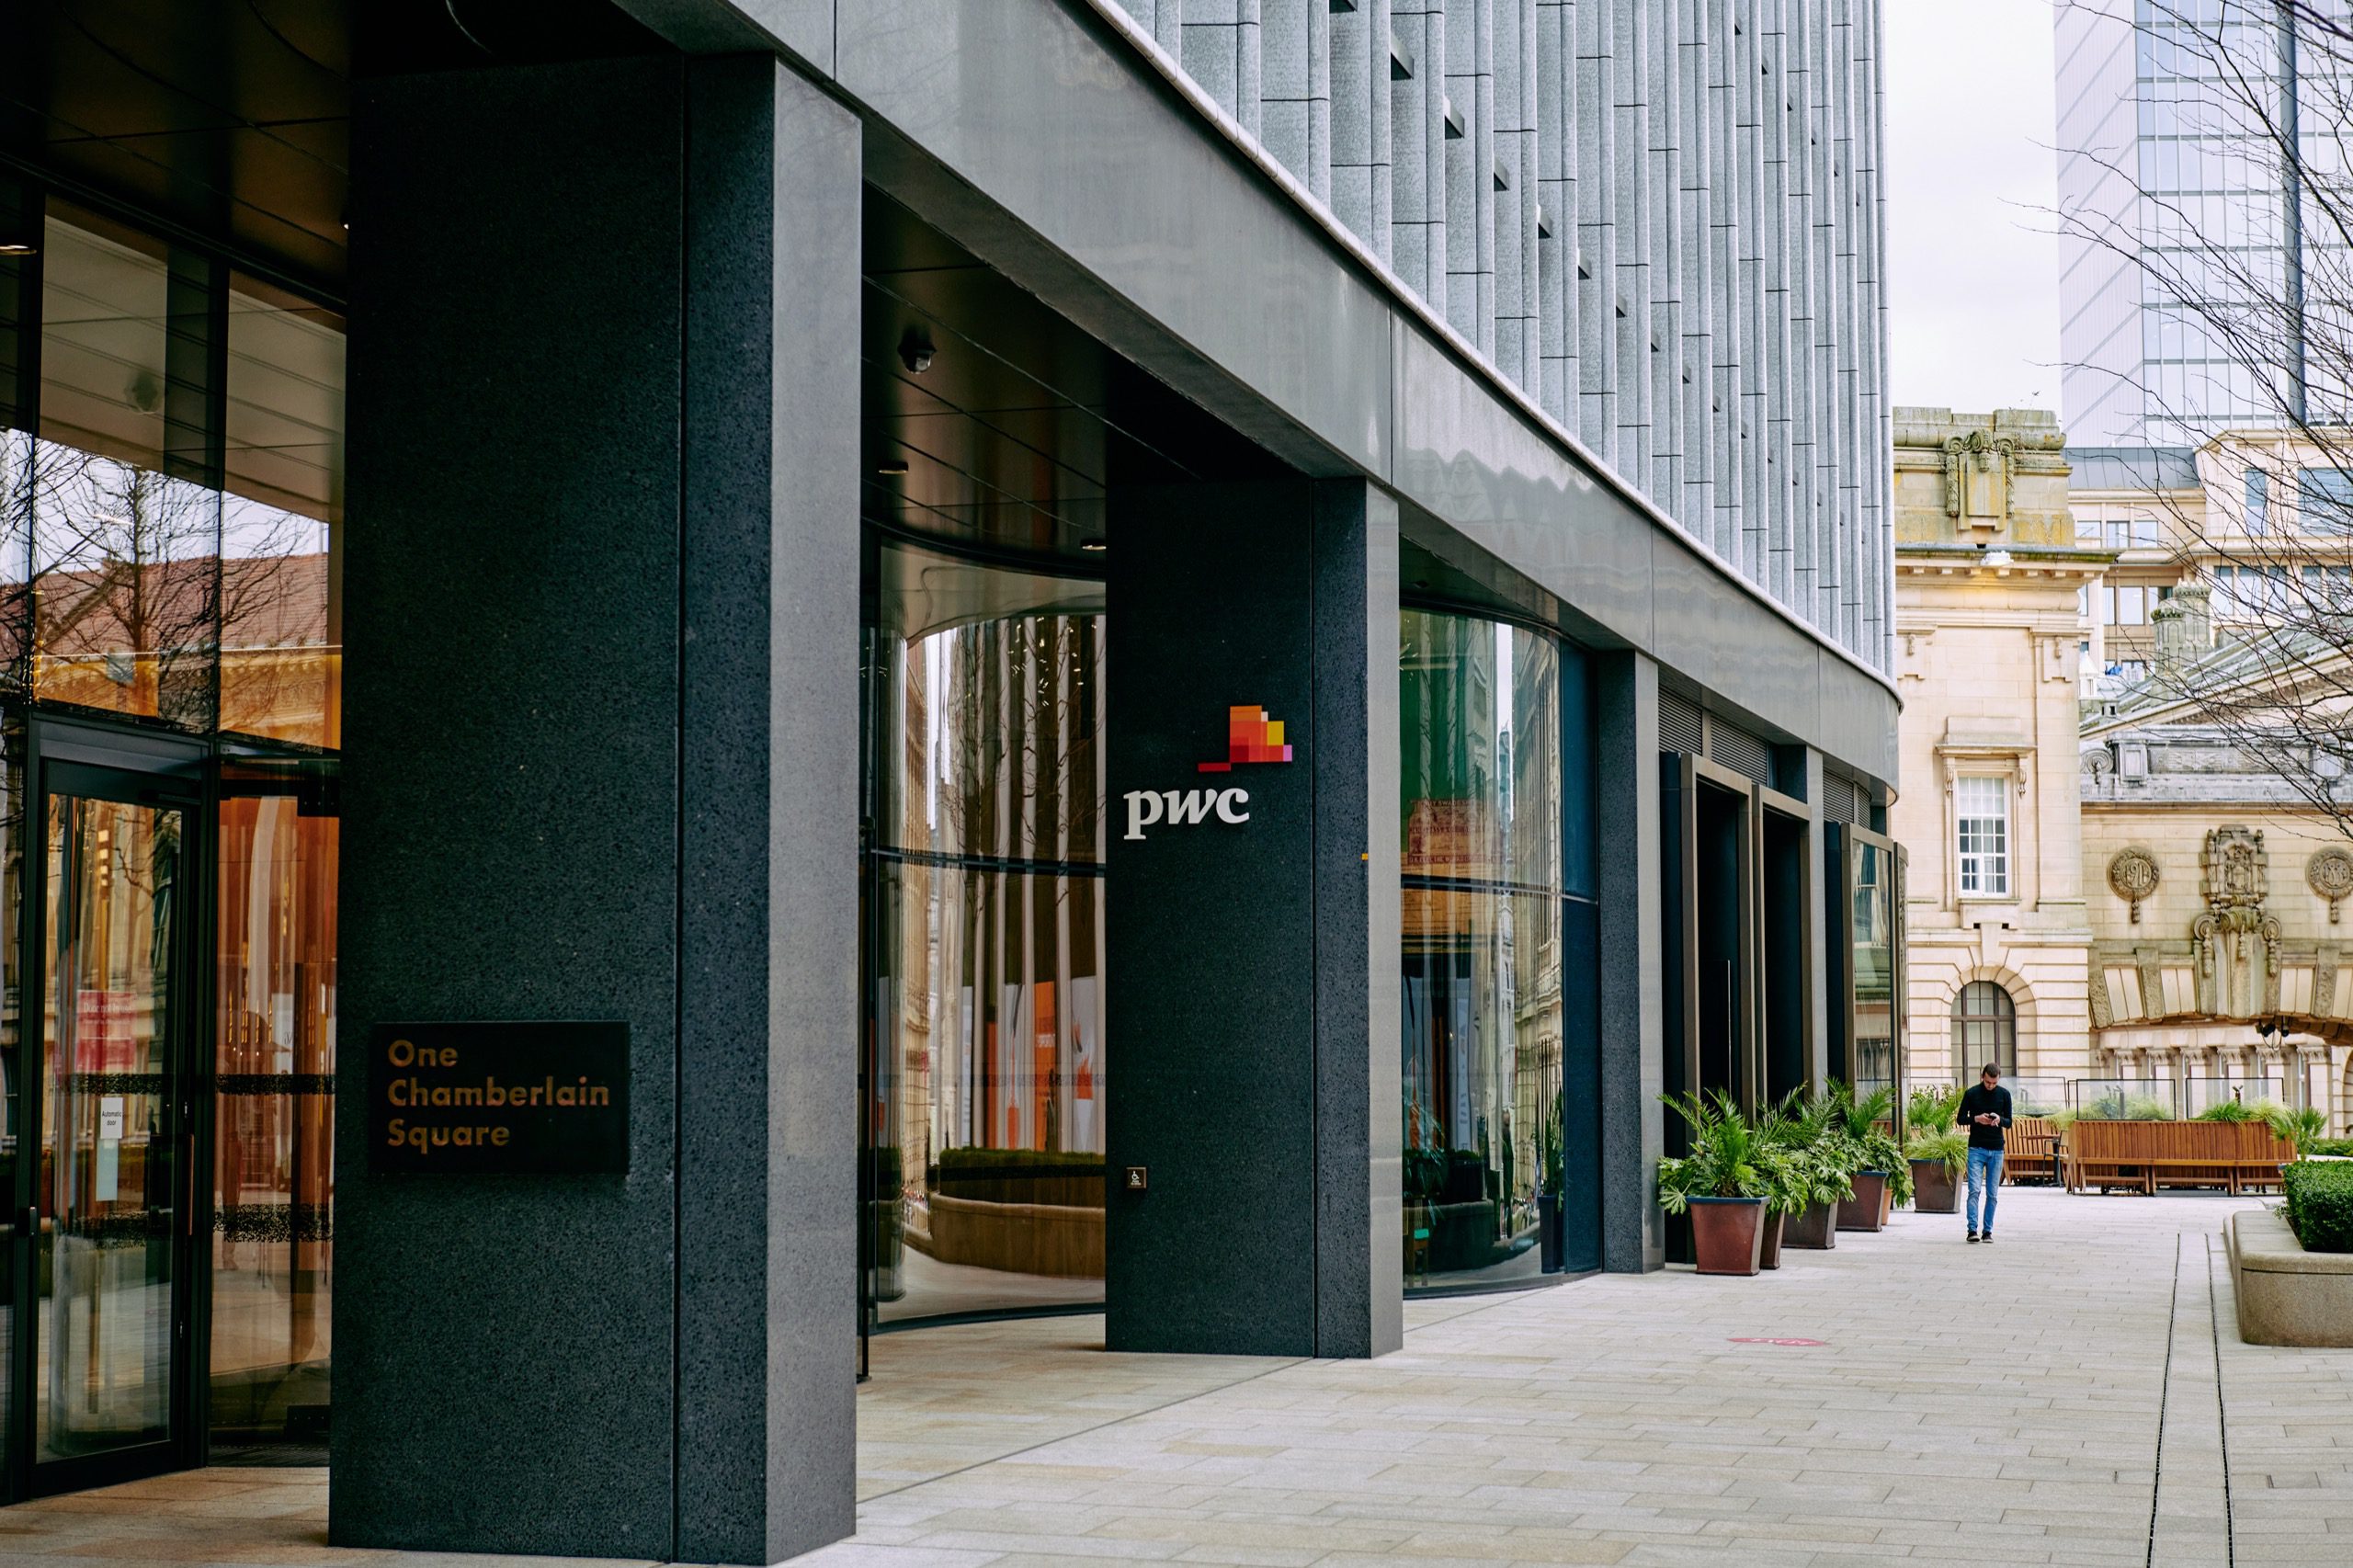 Entrance to One Chamberlain Square, Paradise Birmingham. The PricewaterhouseCoopers (PwC) logo is visible on a column.